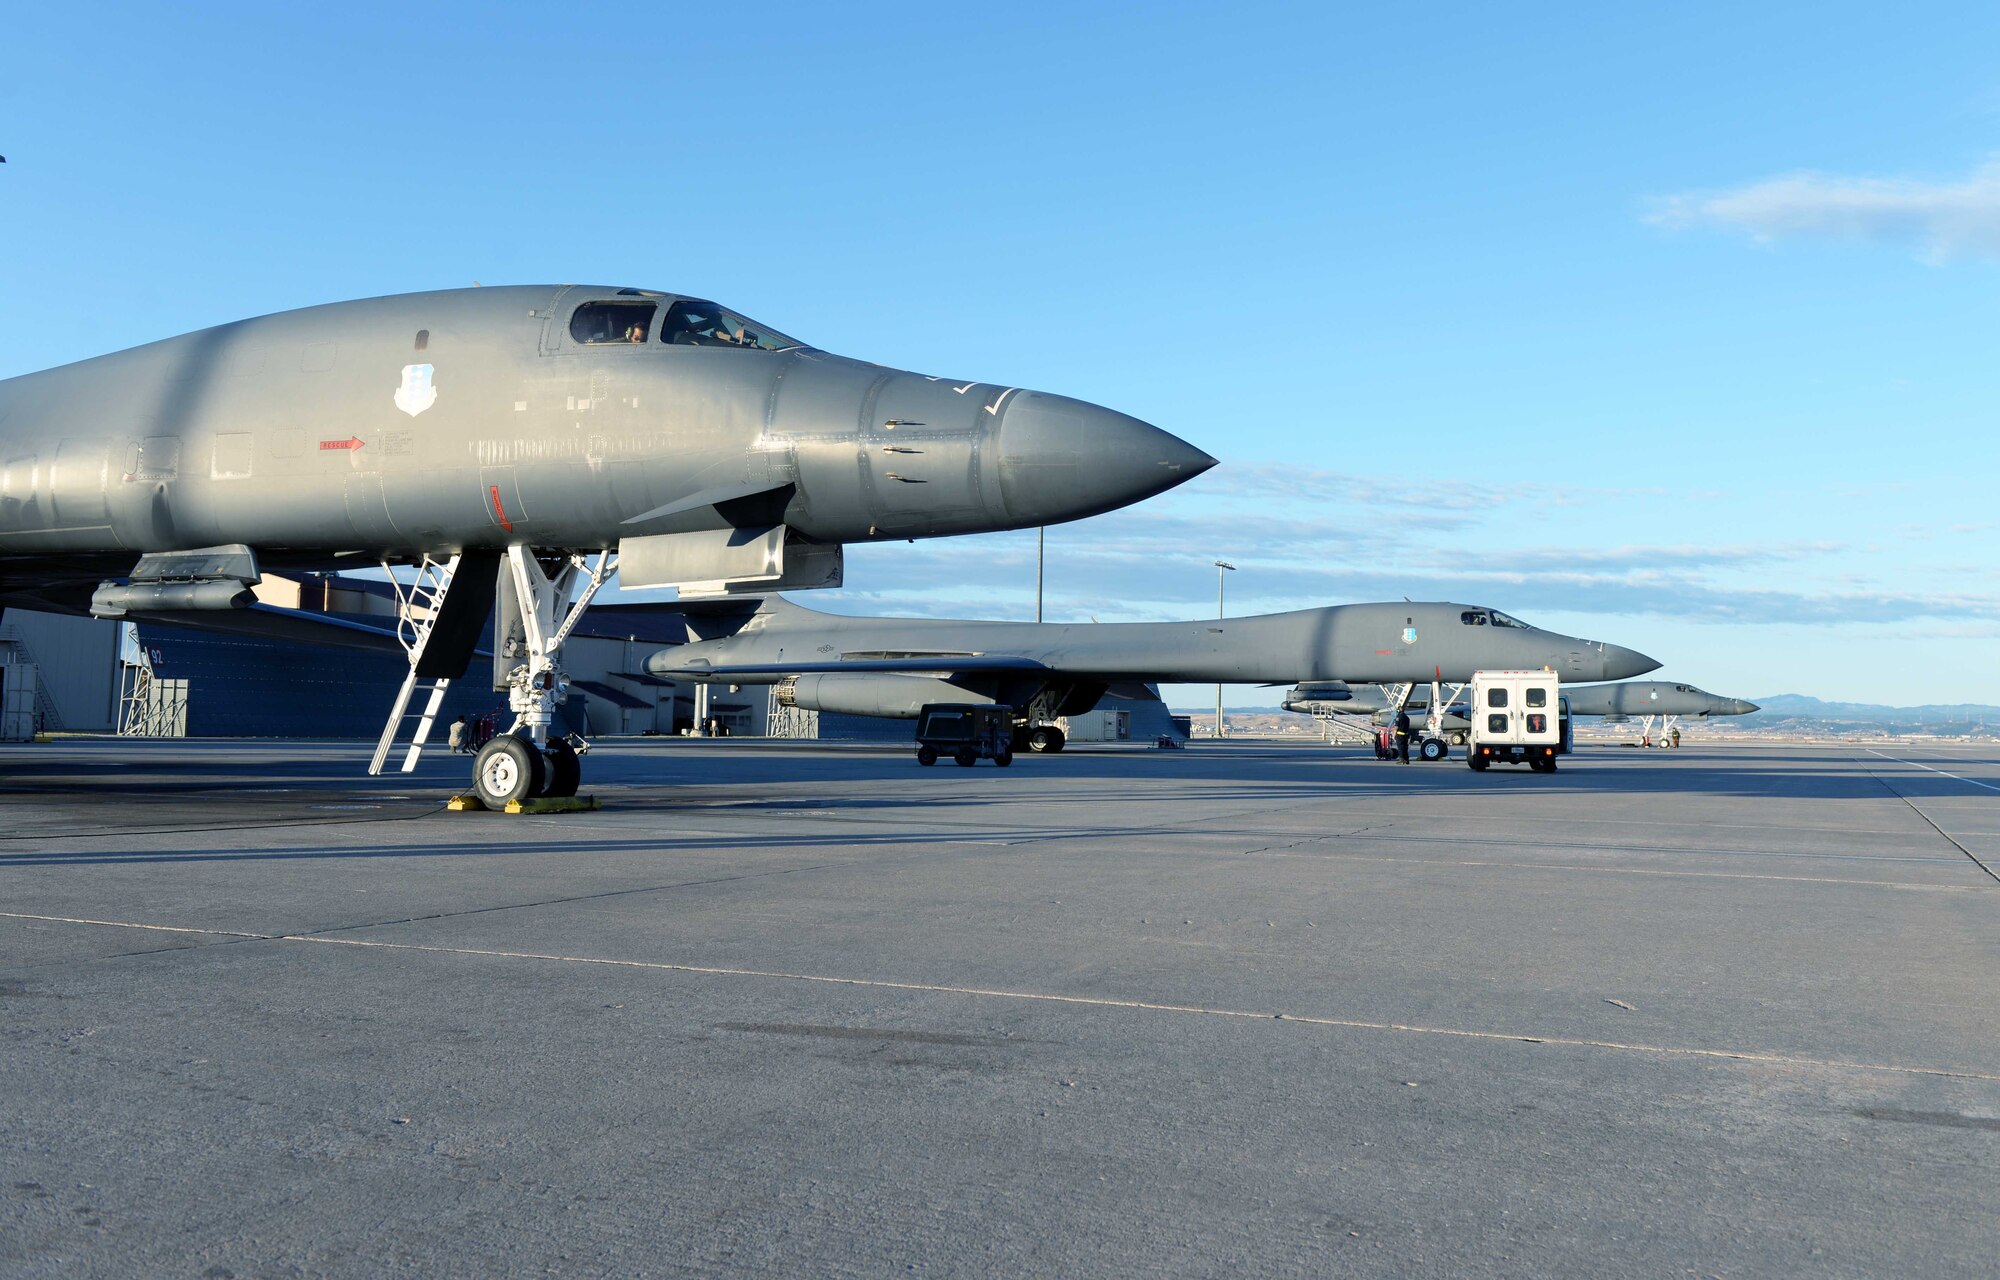 A U.S. Air Force B-1B Lancer stands ready prior to departing Ellsworth Air Force Base, S.D., April 21, 2020. Carrying the largest conventional payload of both guided and unguided weapons in the Air Force inventory, the multi-mission B-1 is the backbone of America’s long-range bomber force. The Department of Defense maintains command and control of its bomber force for any mission, anywhere in the world, at any time. (U.S. Air Force photo by Airman Quentin K. Marx)